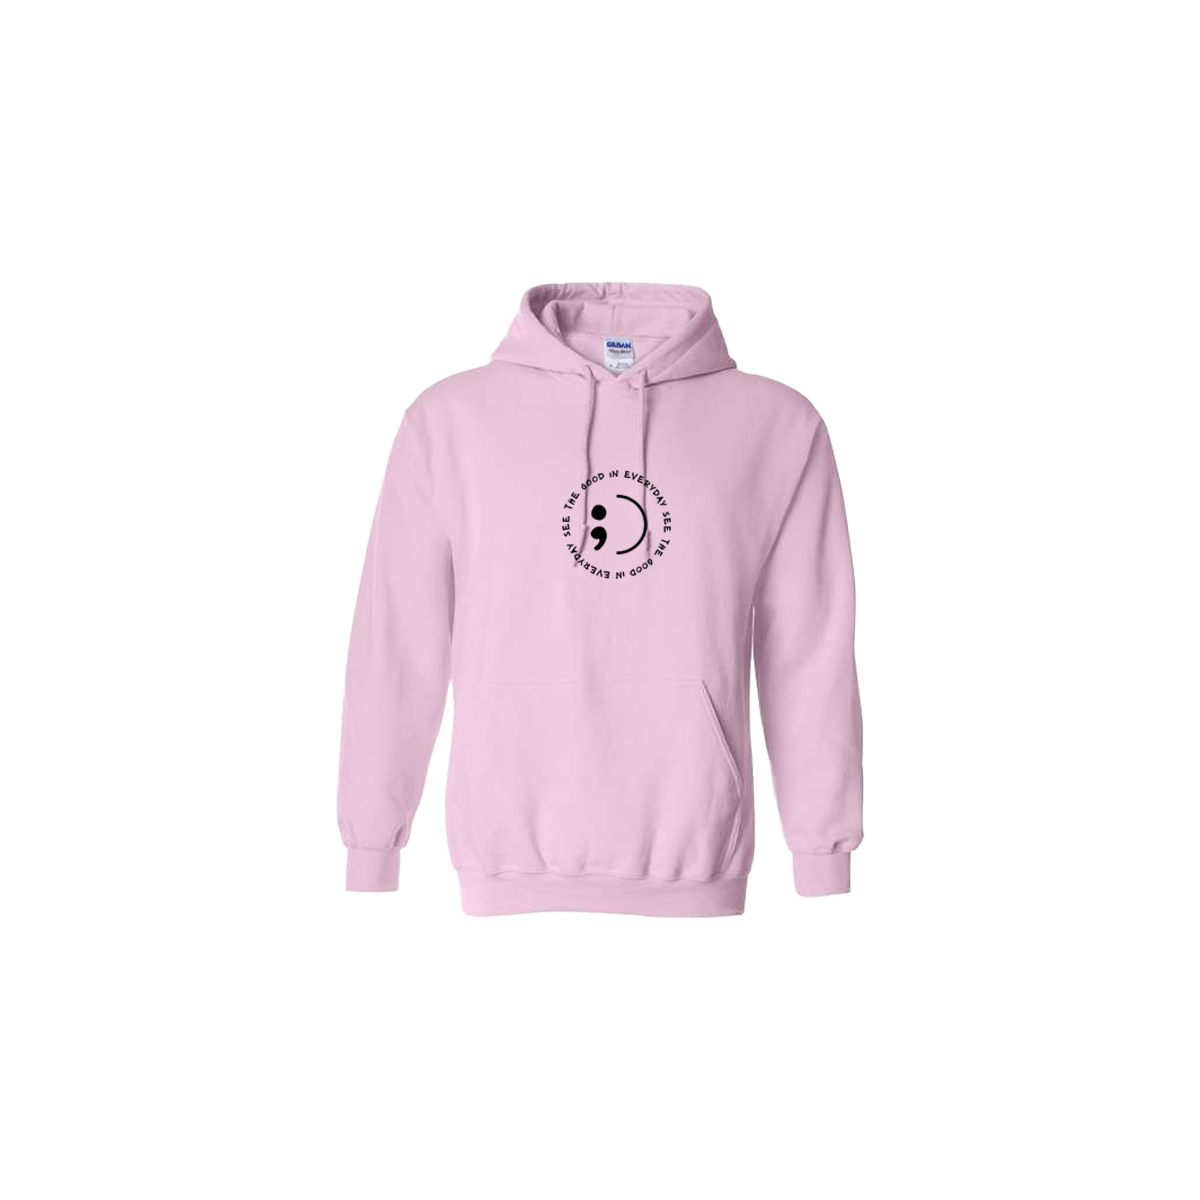 See the Good in Everyday Embroidered Light Pink Hoodie - Mental Health Awareness Clothing